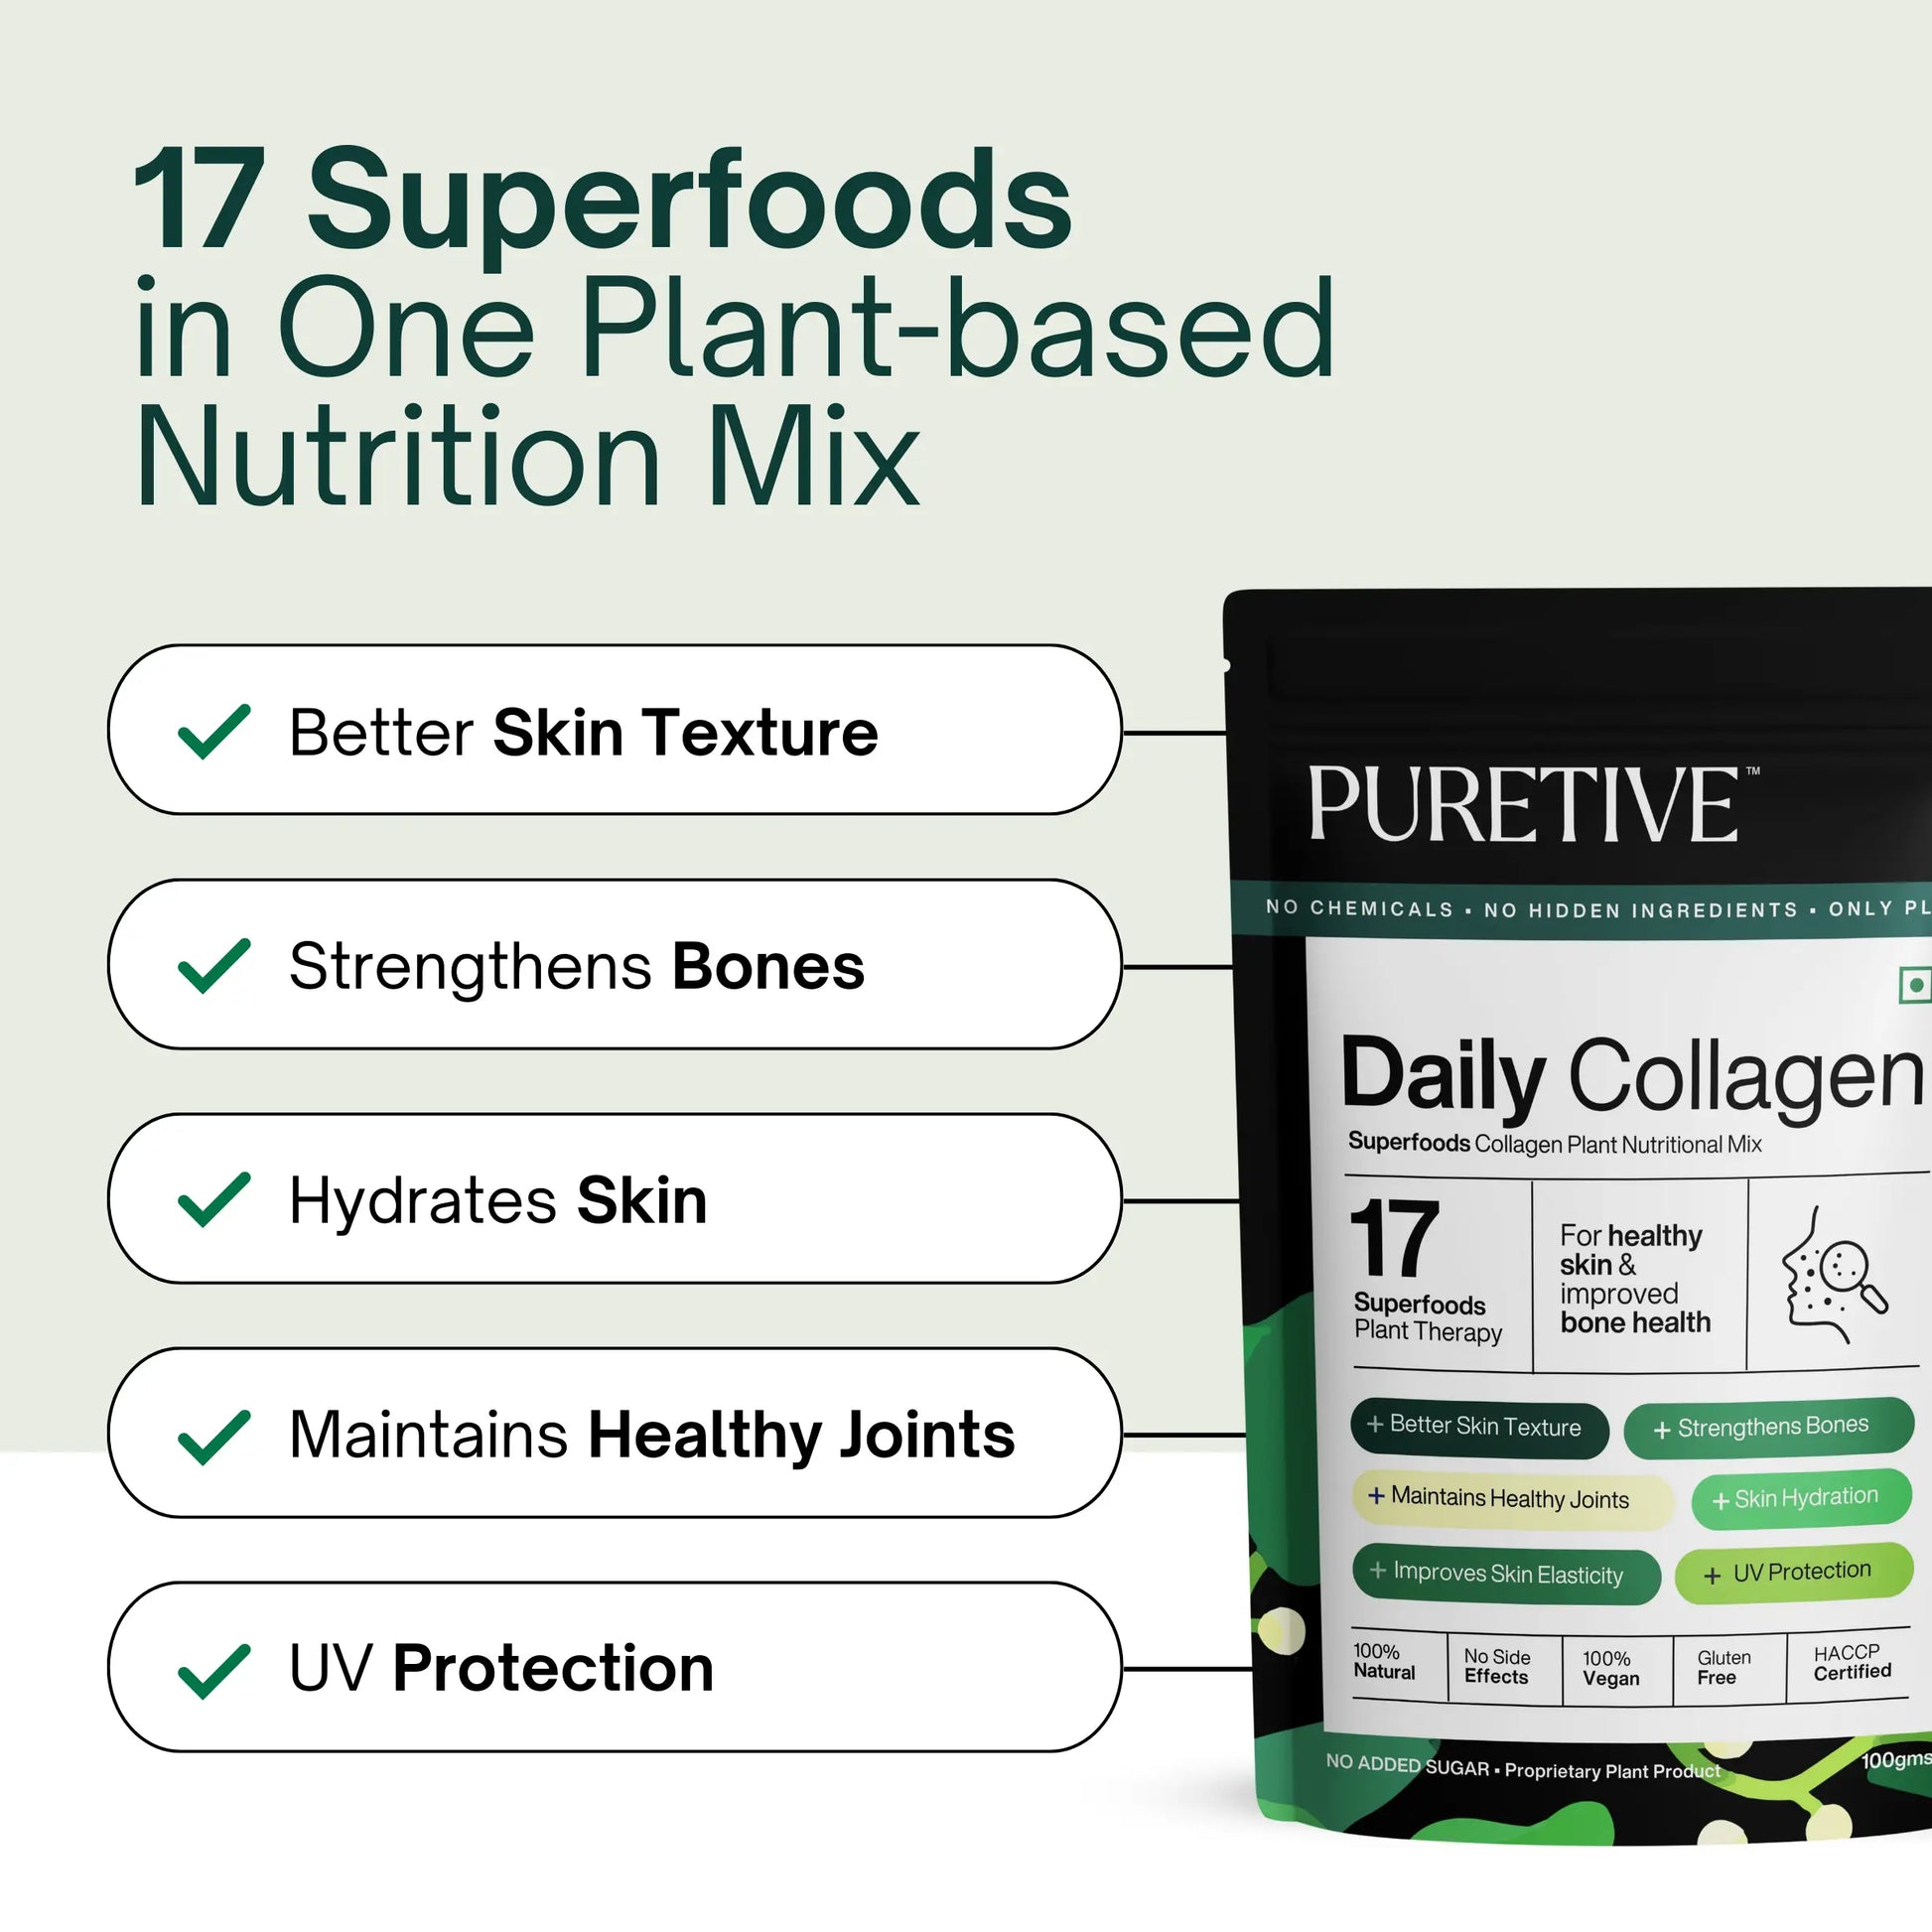 Puretive's Daily Collagen Nutrition Mix with 17 100% Pure superfoods, aimed at protecting the skin barrier by boosting collagen production, improving skin health and joint function. Additionally providing UV protection & hydration.